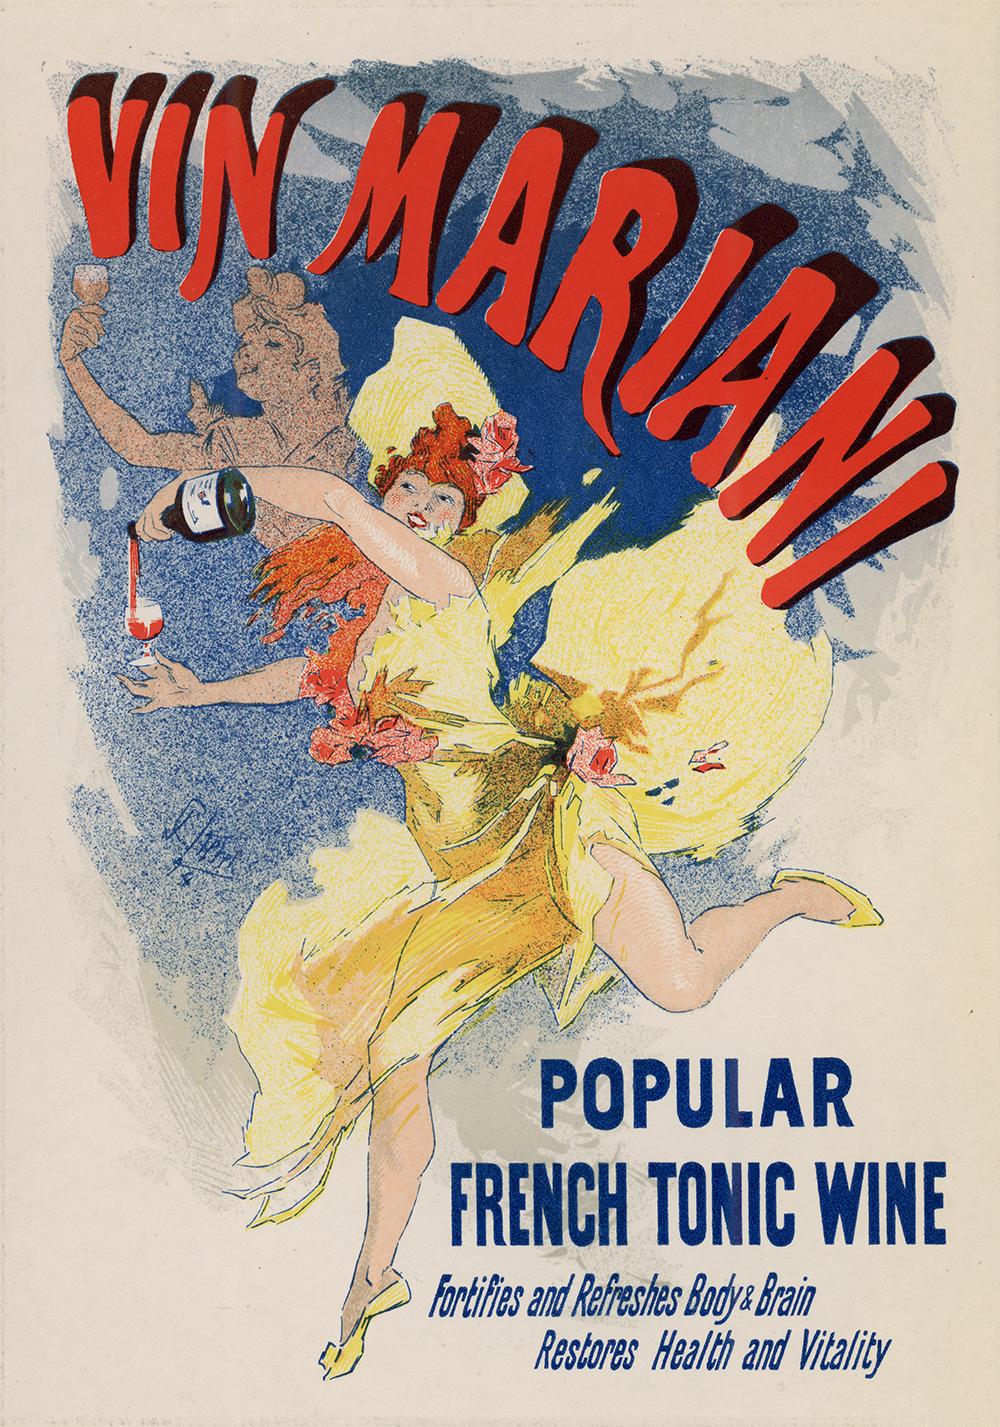 Vin Mariani, Popular French Tonic Wine by Jules Chéret, Japon lithograph, 1896